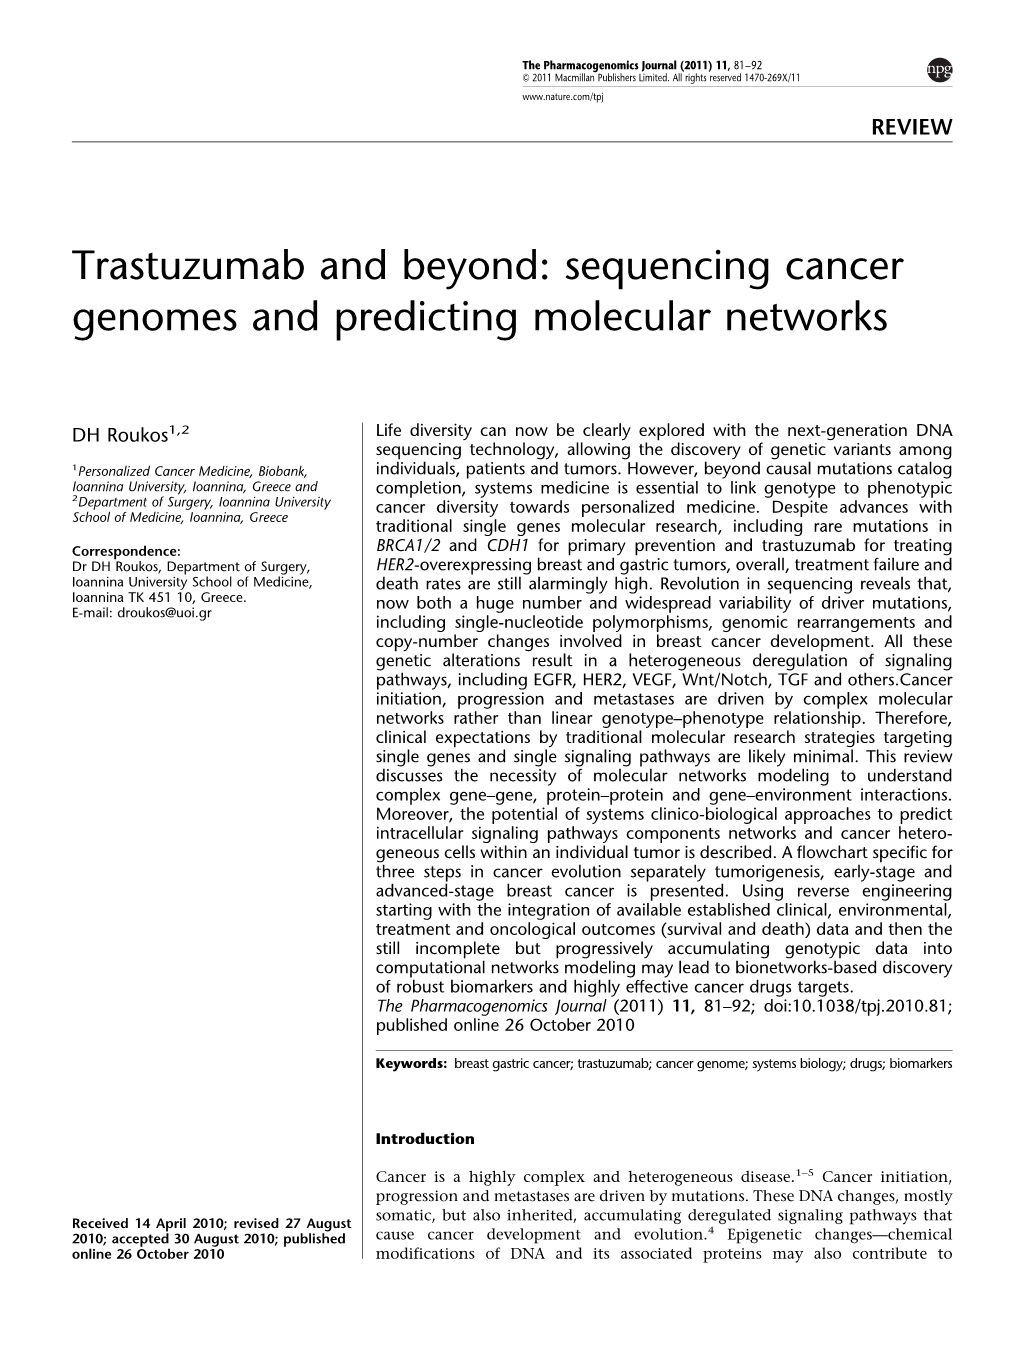 Sequencing Cancer Genomes and Predicting Molecular Networks